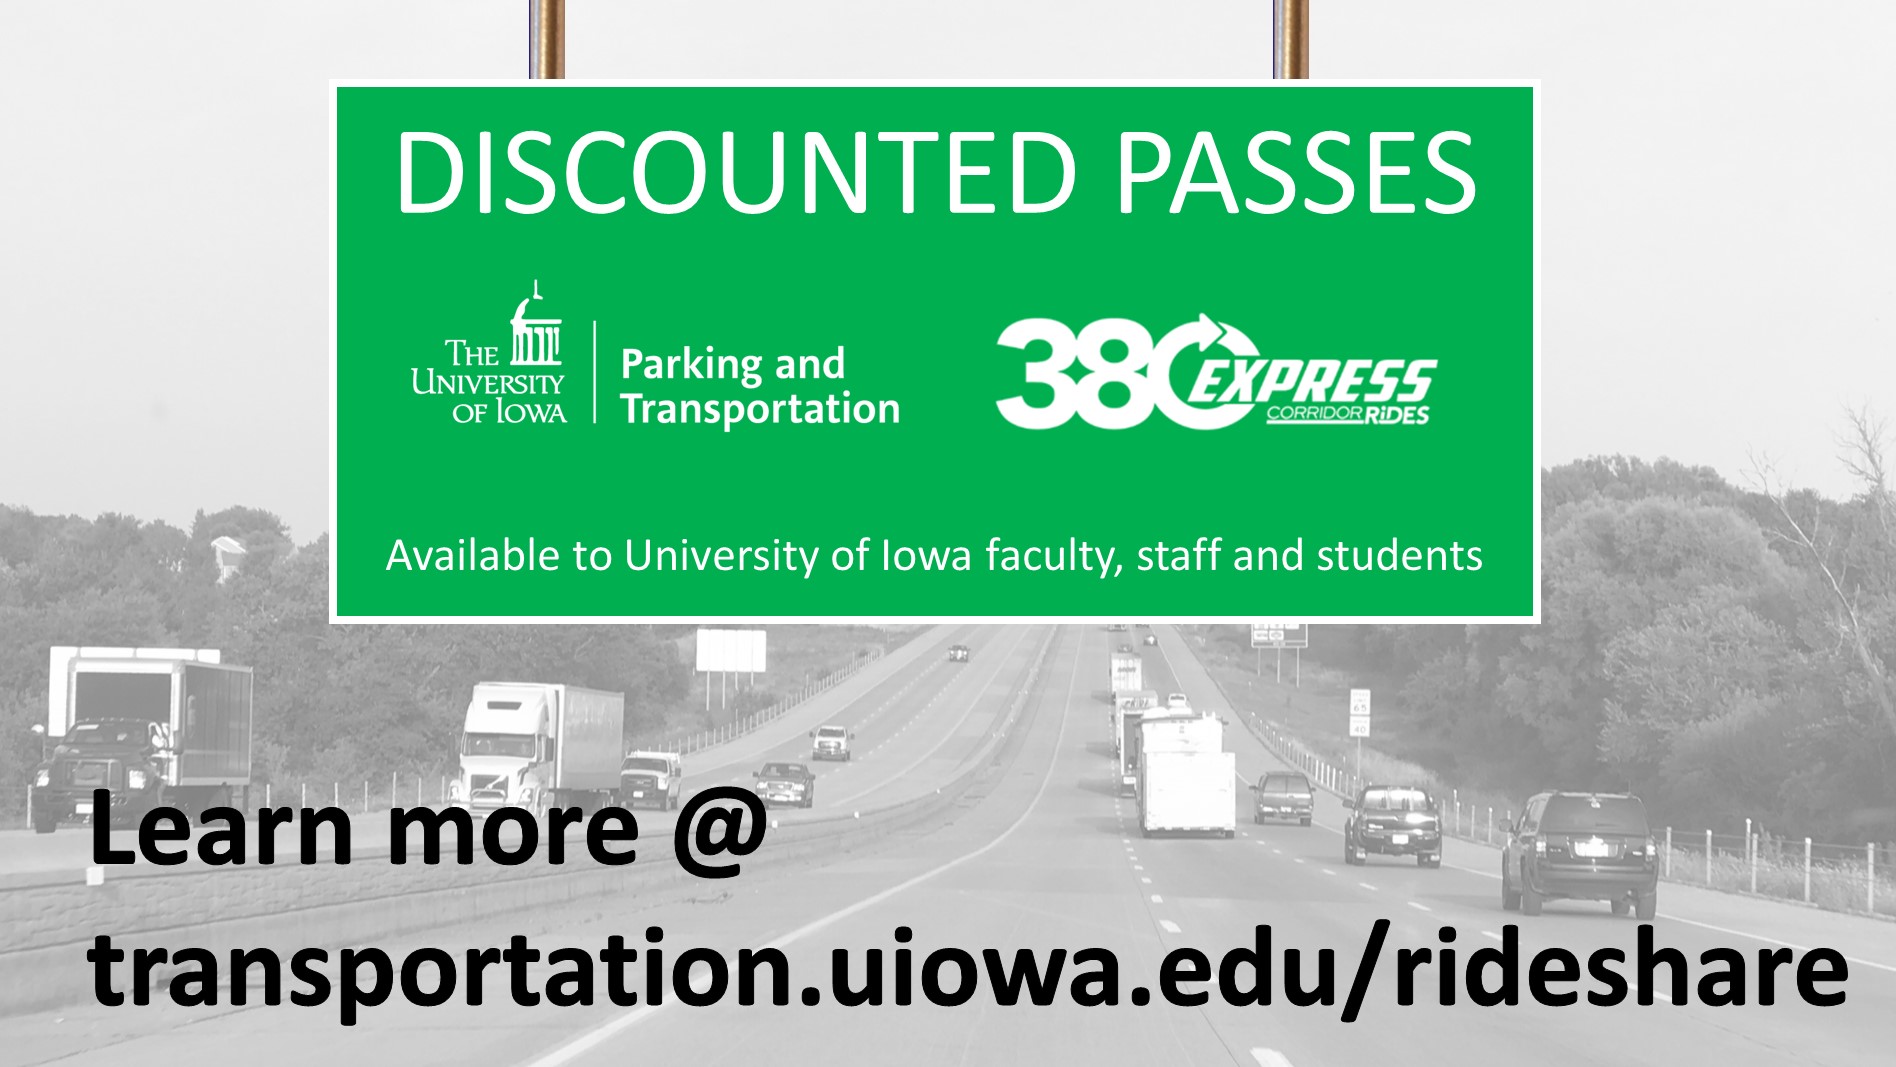 Discounted passes on 380 Express